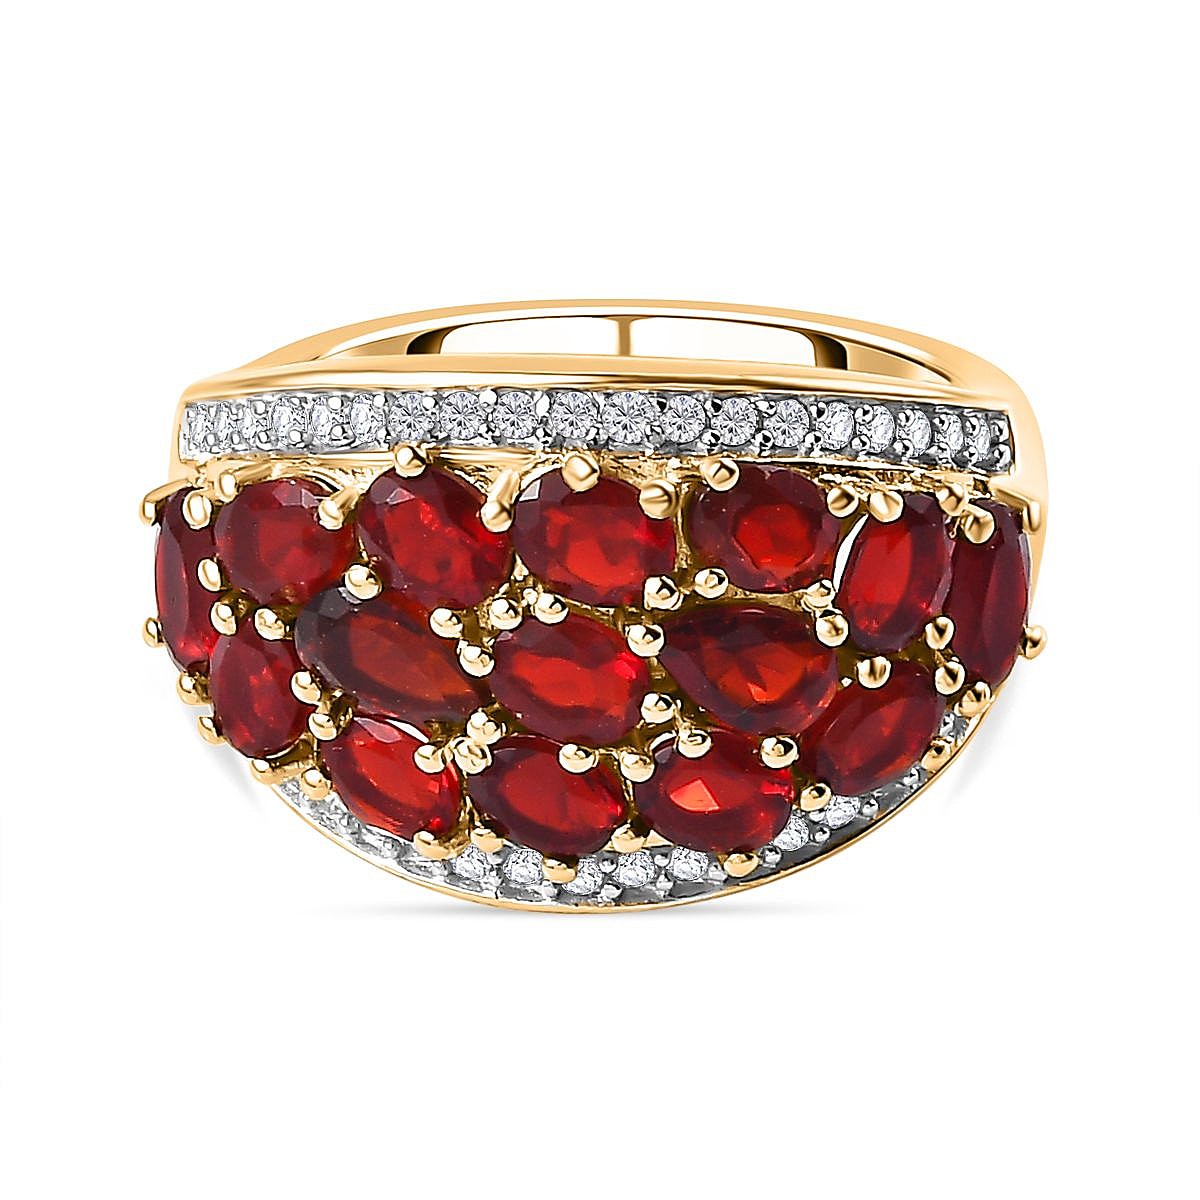 Salamanca Fire Opal and Natural Zircon Cluster Ring in 18K Vermeil Yellow Gold Plated Sterling Silver 2.15 Ct.